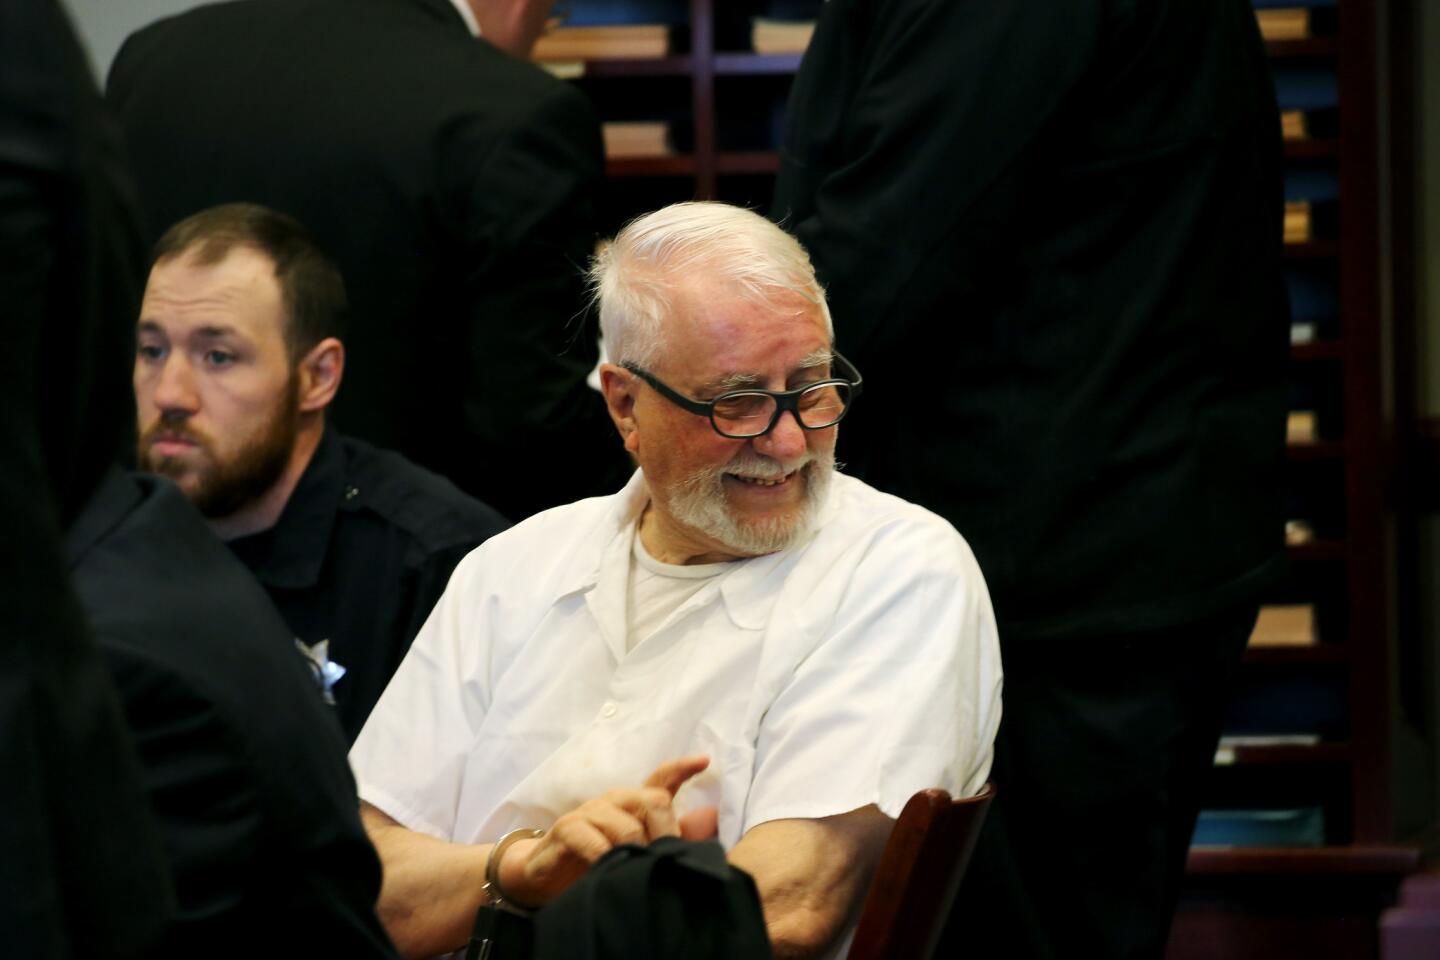 Jack McCullough, convicted in the 1957 killing of 7-year-old Maria Ridulph in Sycamore, Ill., appears in court at the DeKalb County Courthouse on April 15, 2016, in Sycamore.